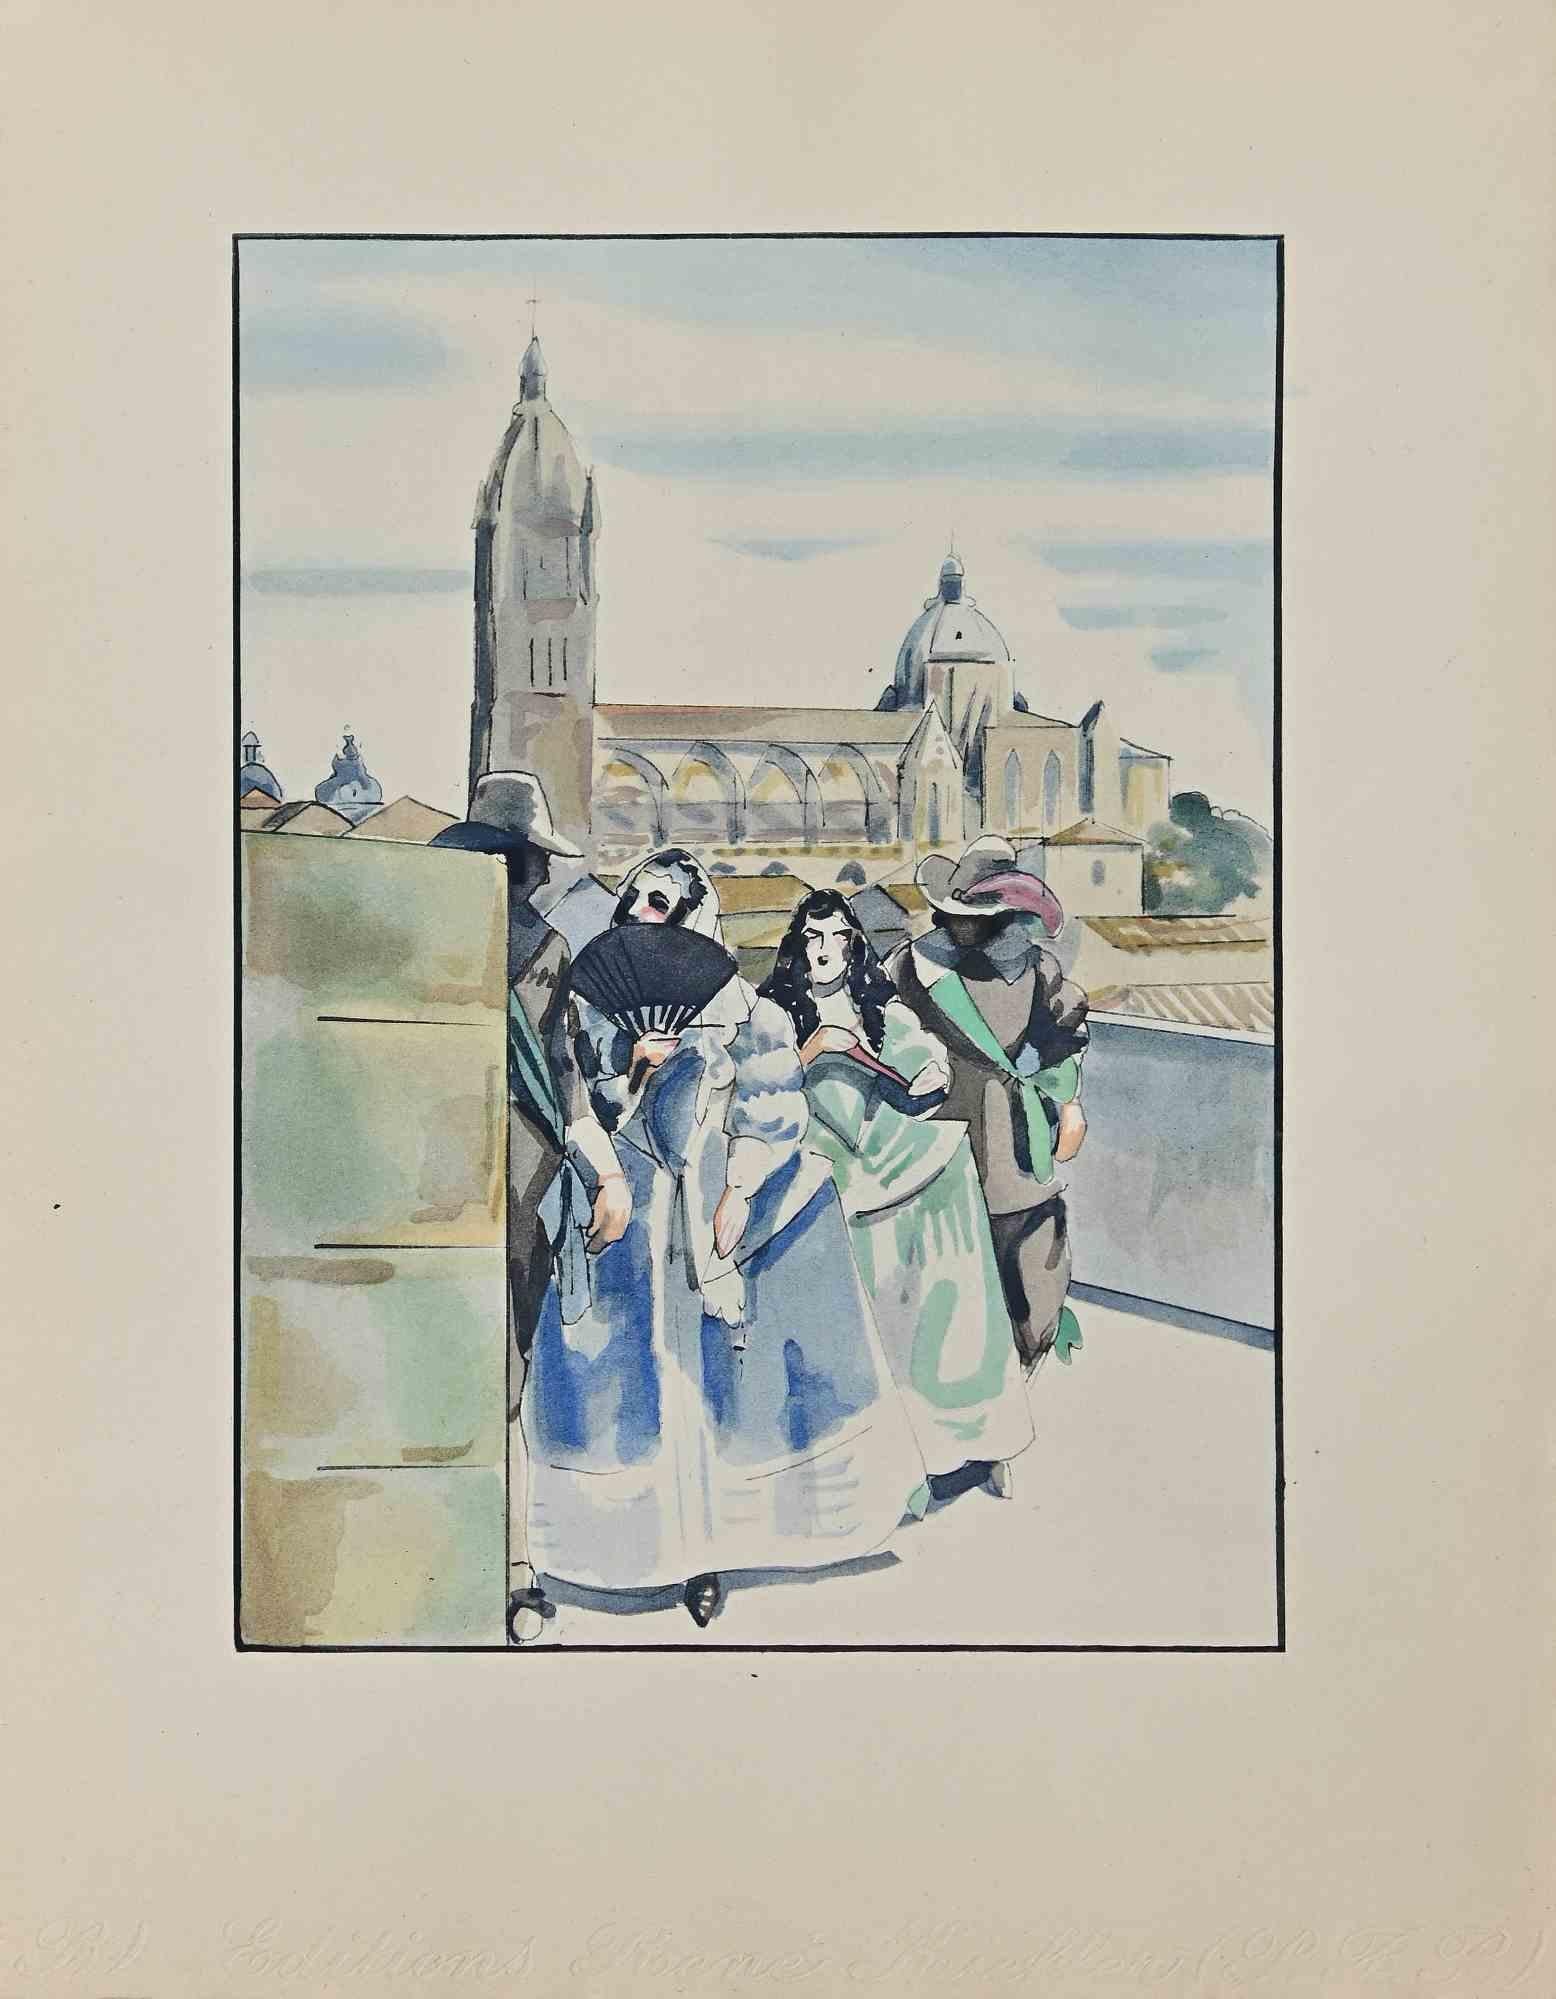 La Promenade is an Ink and watercolor Drawing realized by Hermann Paul  in the early 20th century.

Good condition on a yellowed cardboard.

René Georges Hermann-Paul (27 December 1864 – 23 June 1940) was a French artist. He was born in Paris and